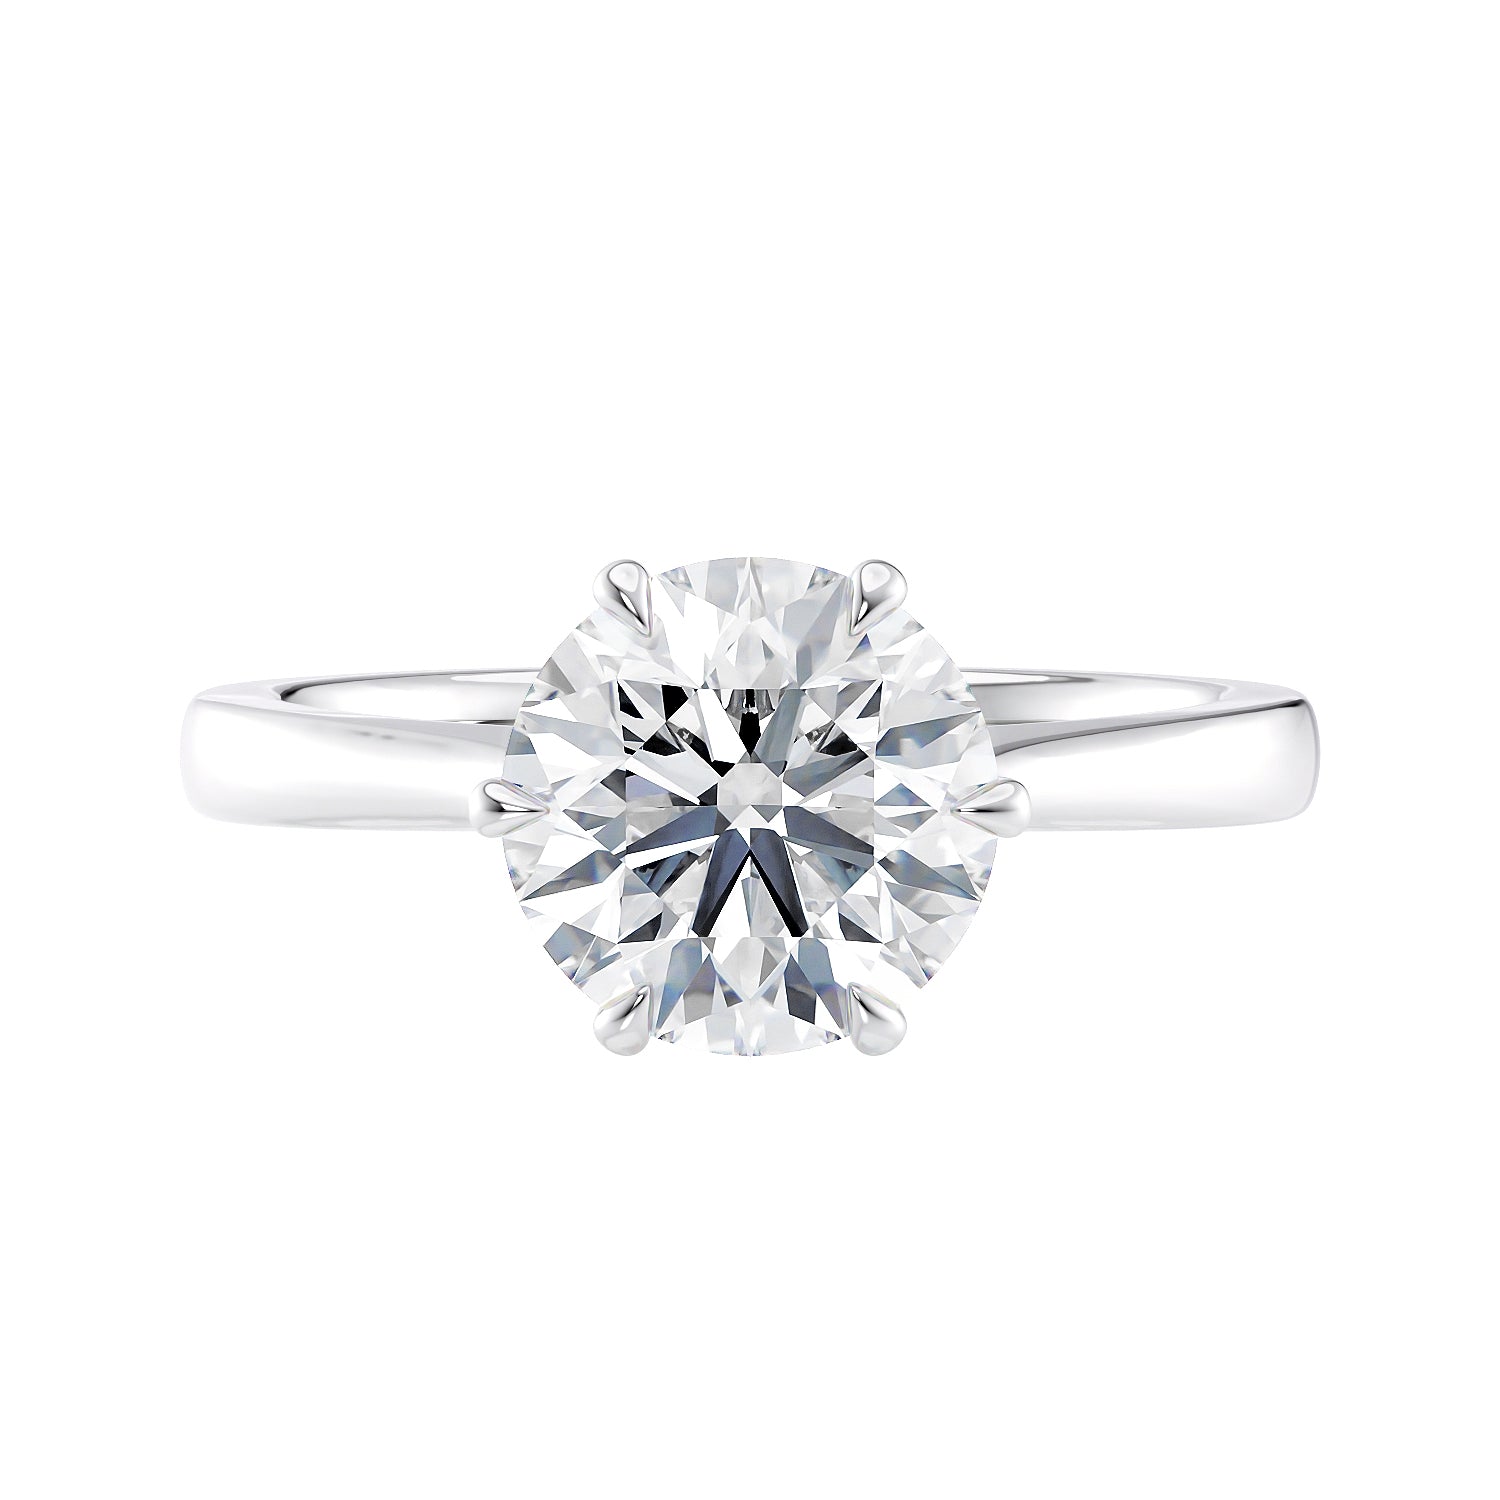 Six claw natural diamond classic engagement ring white gold front view.